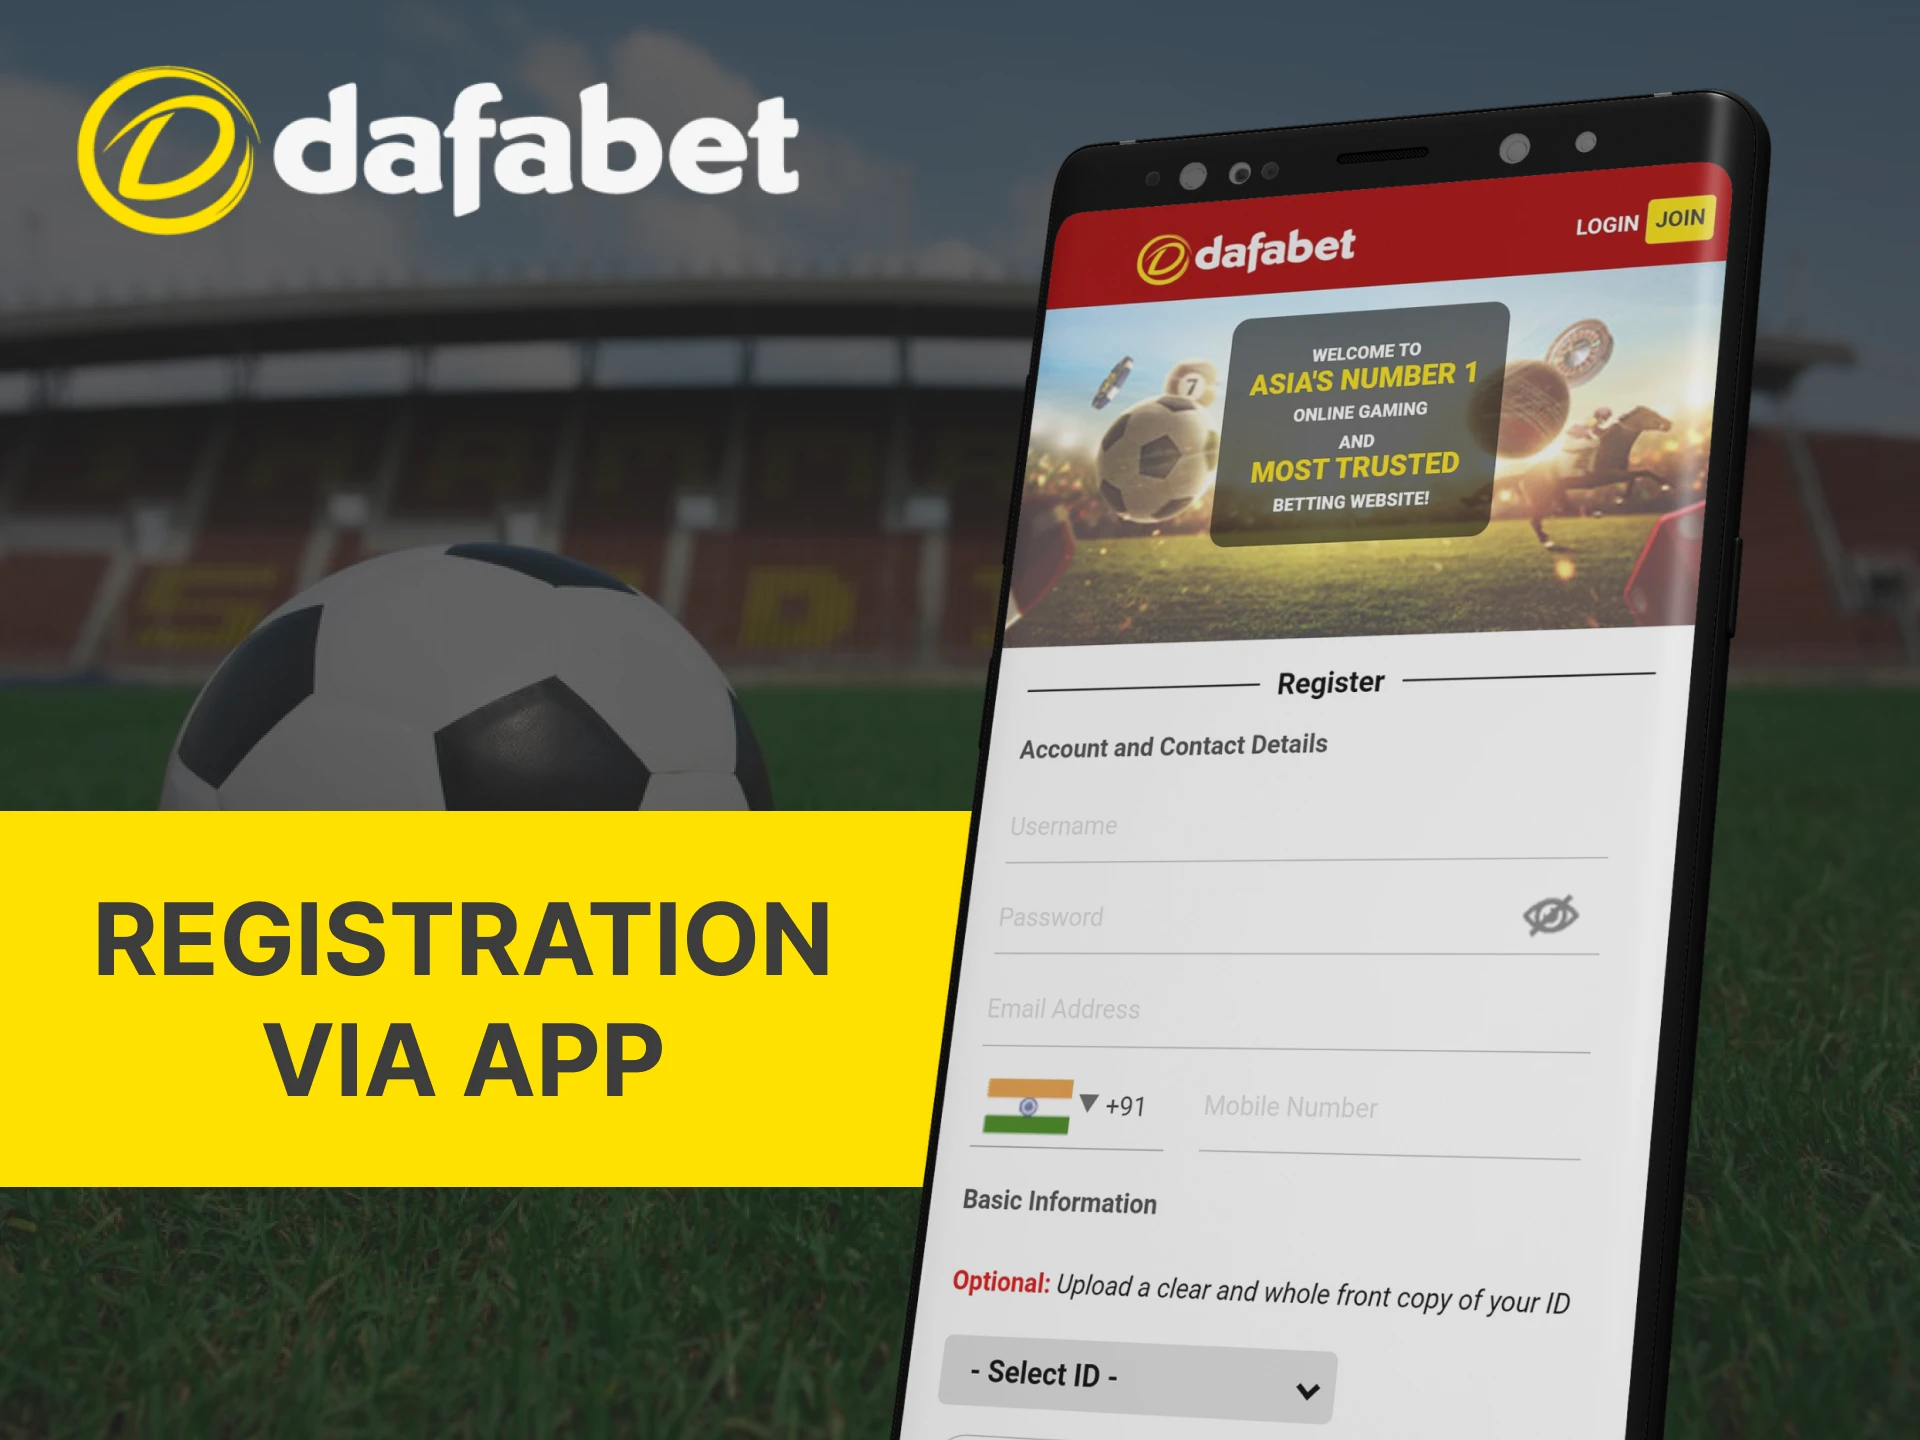 To register, you can use the Dafabet mobile app.